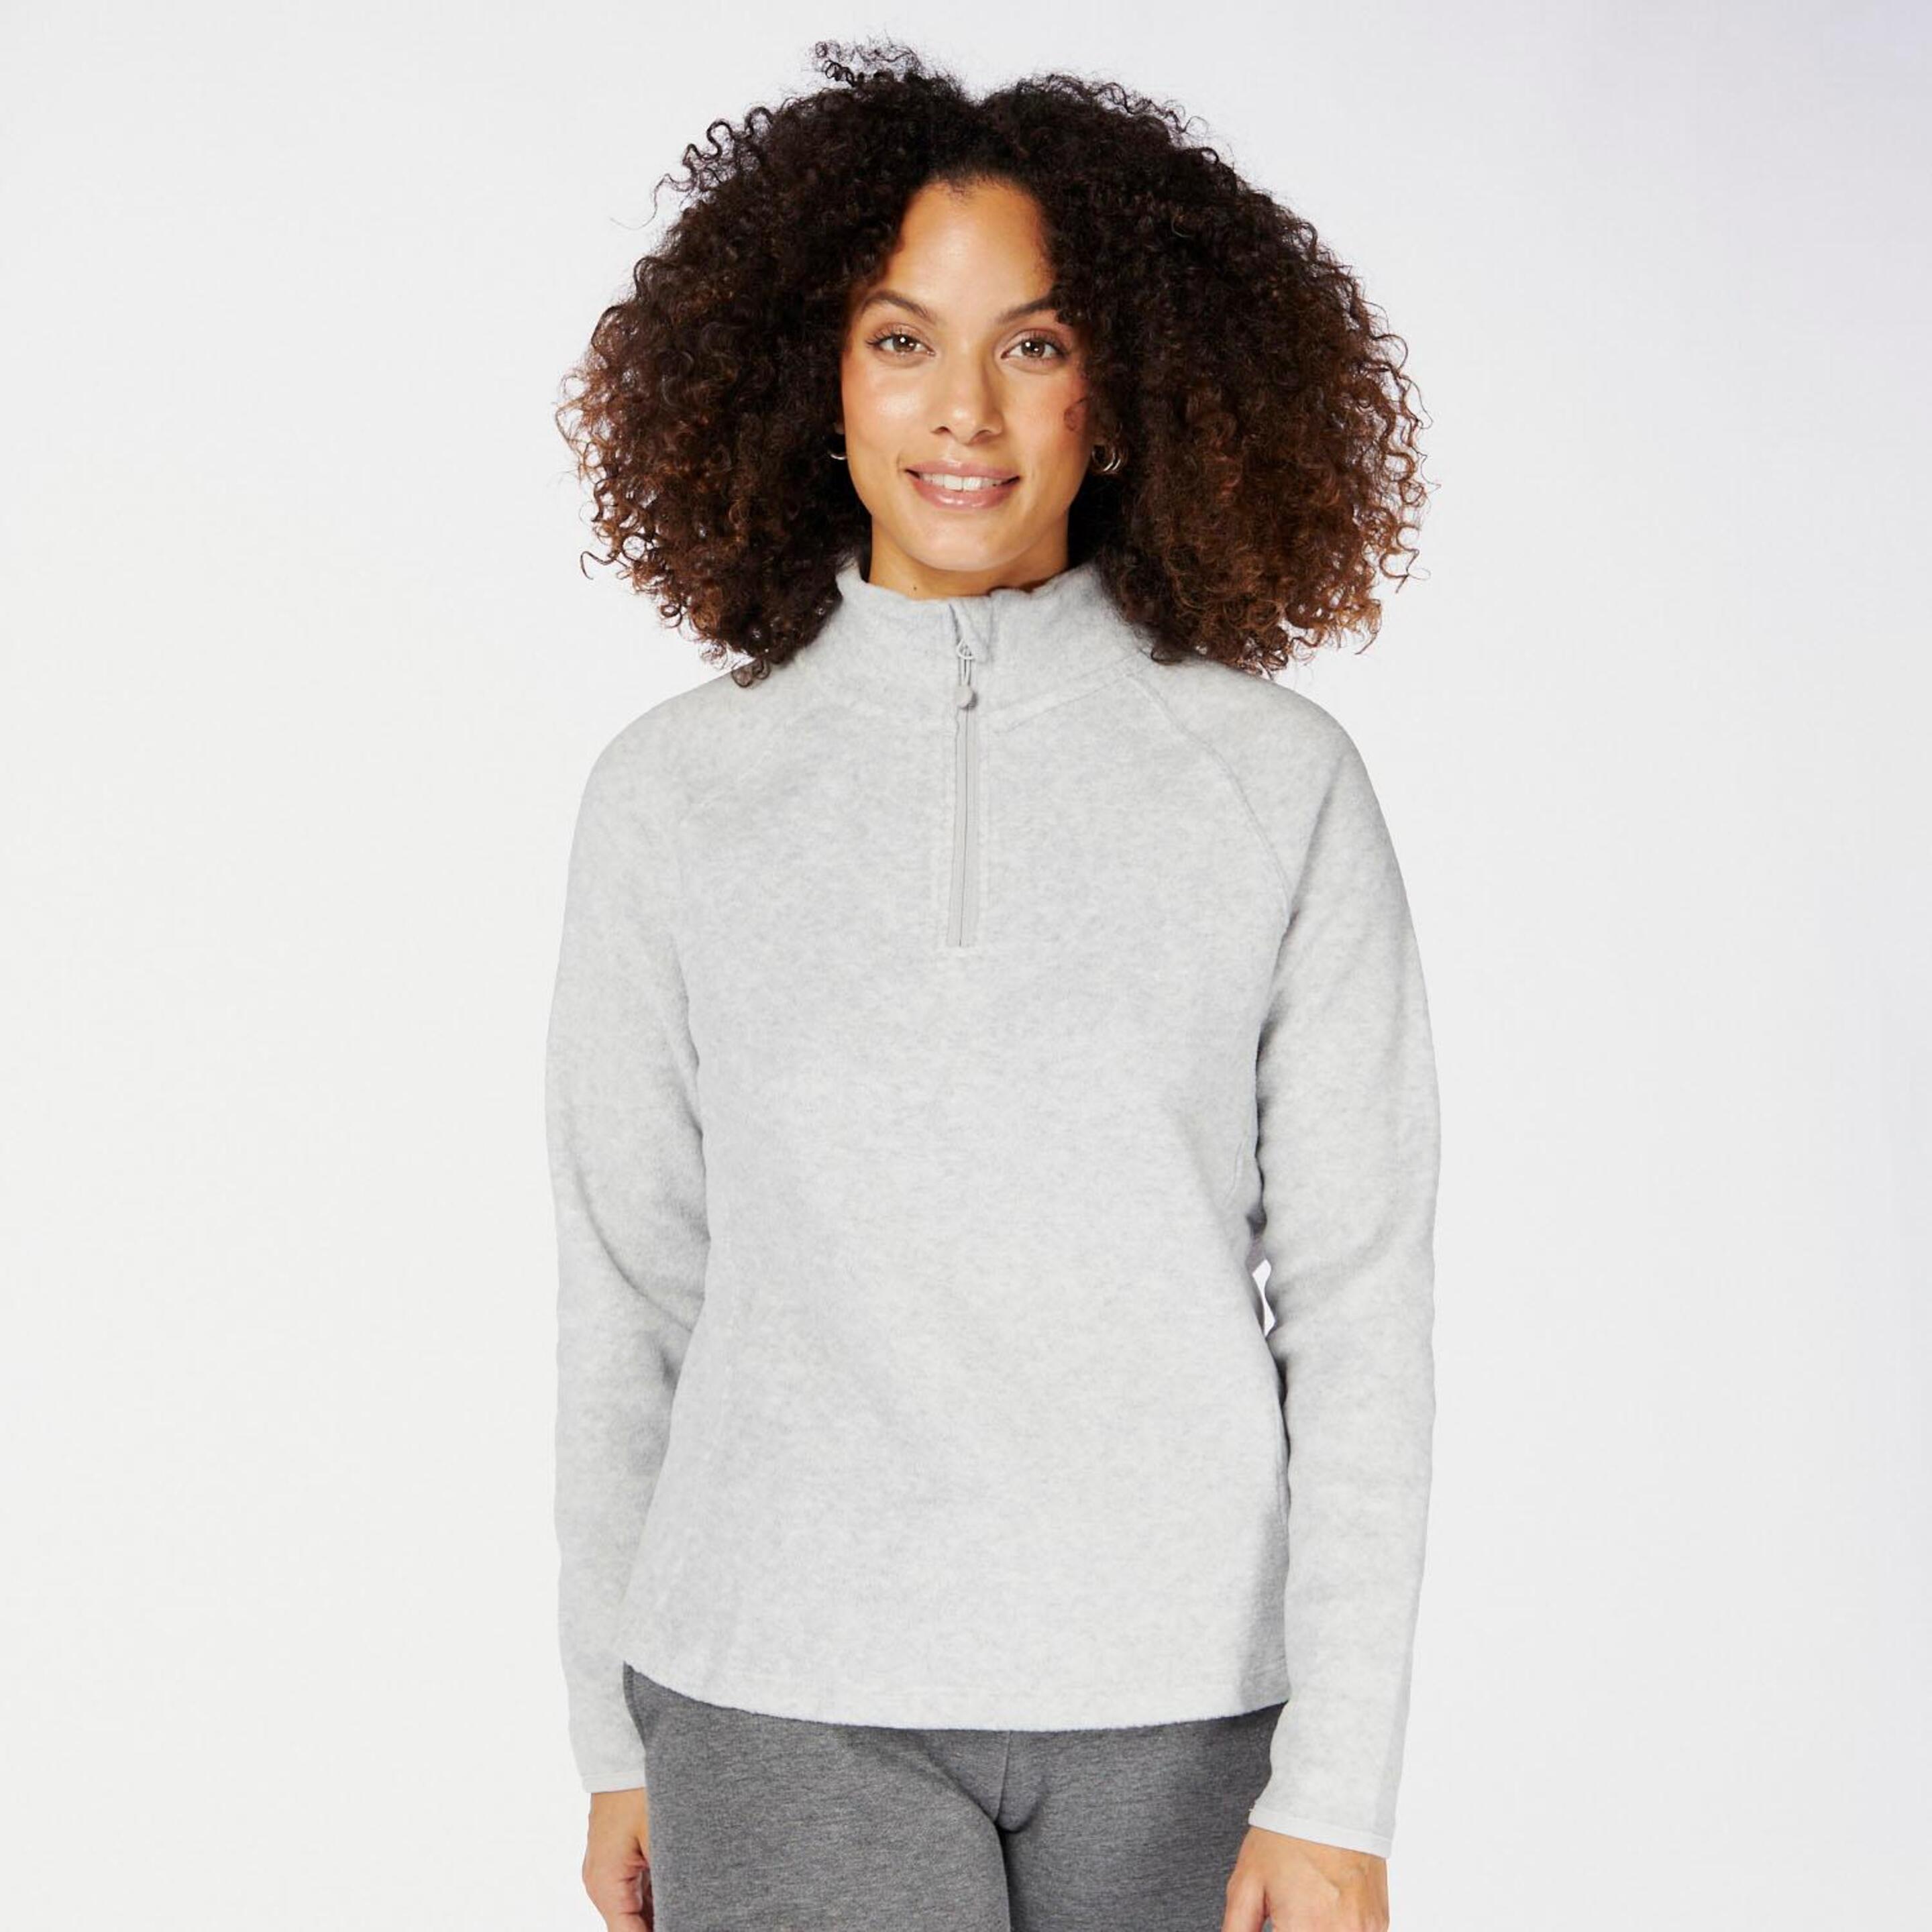 Up Basic - gris - Forro Polar Mujer